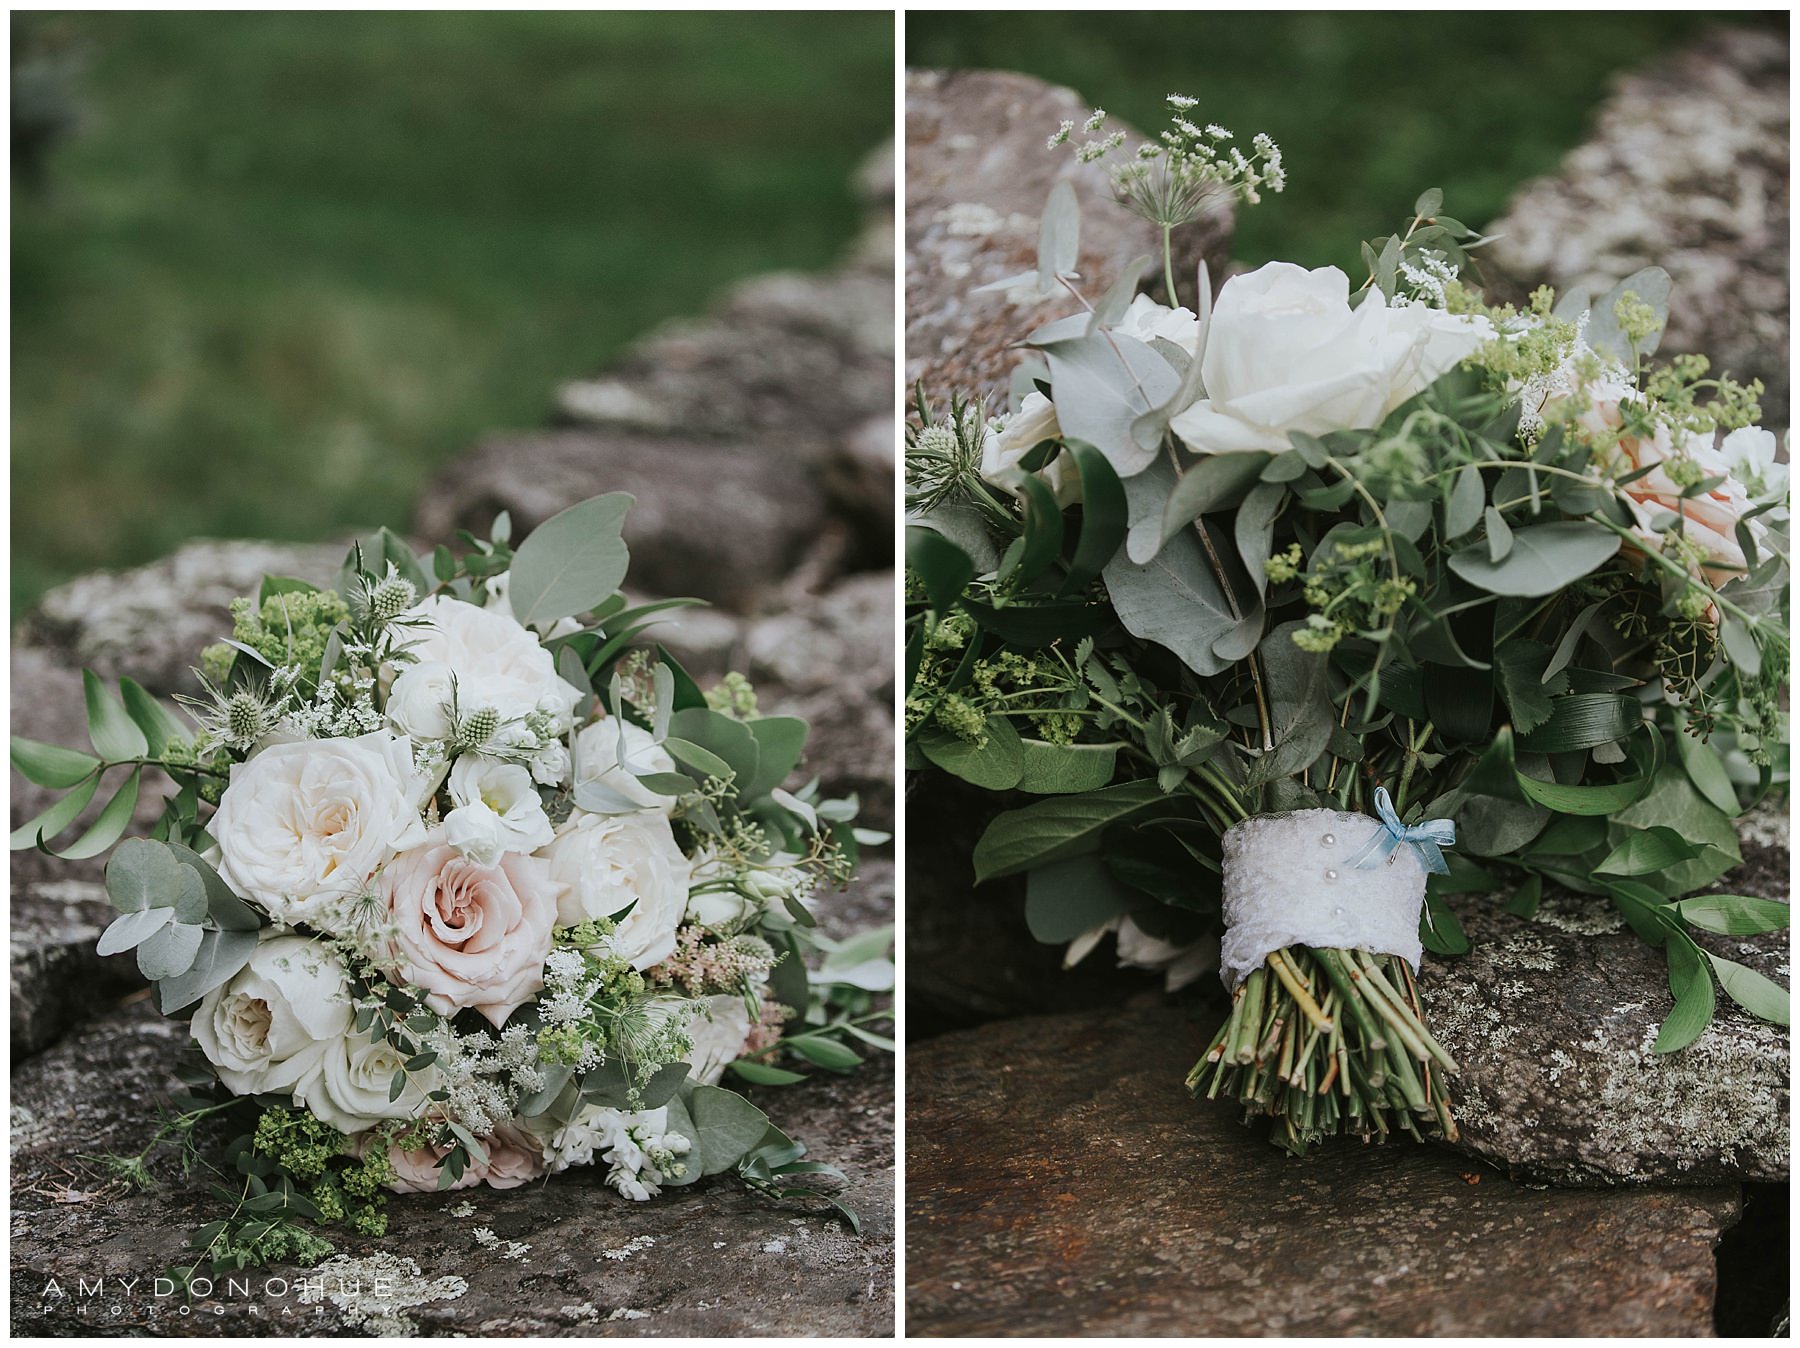 Wedding Bouquet with Mom's Wedding Dress Tied Around It | Vermont Wedding Photographer | © Amy Donohue Photography